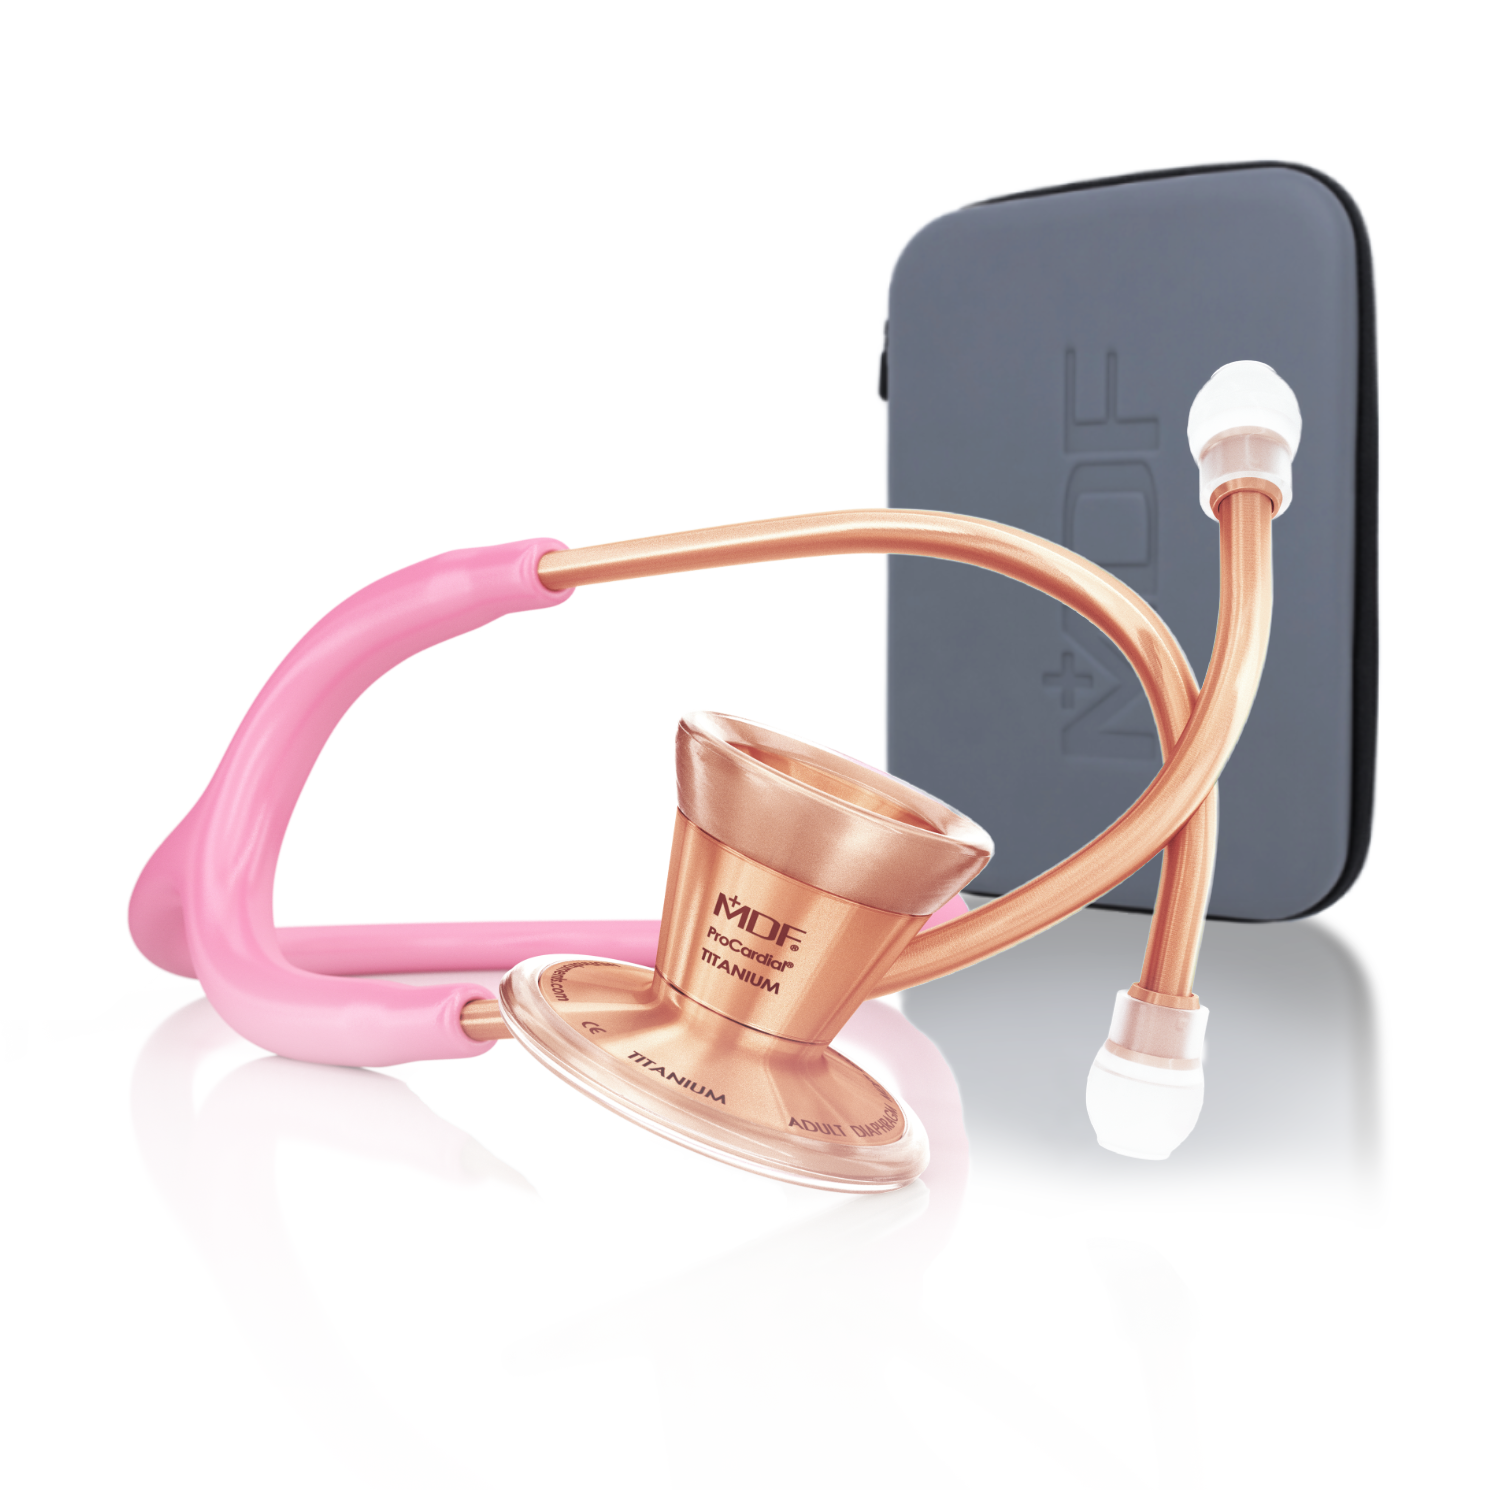 ProCardial® Titanium Adult Cardiology Stethoscope - Pink Glitter/Rose Gold + Case